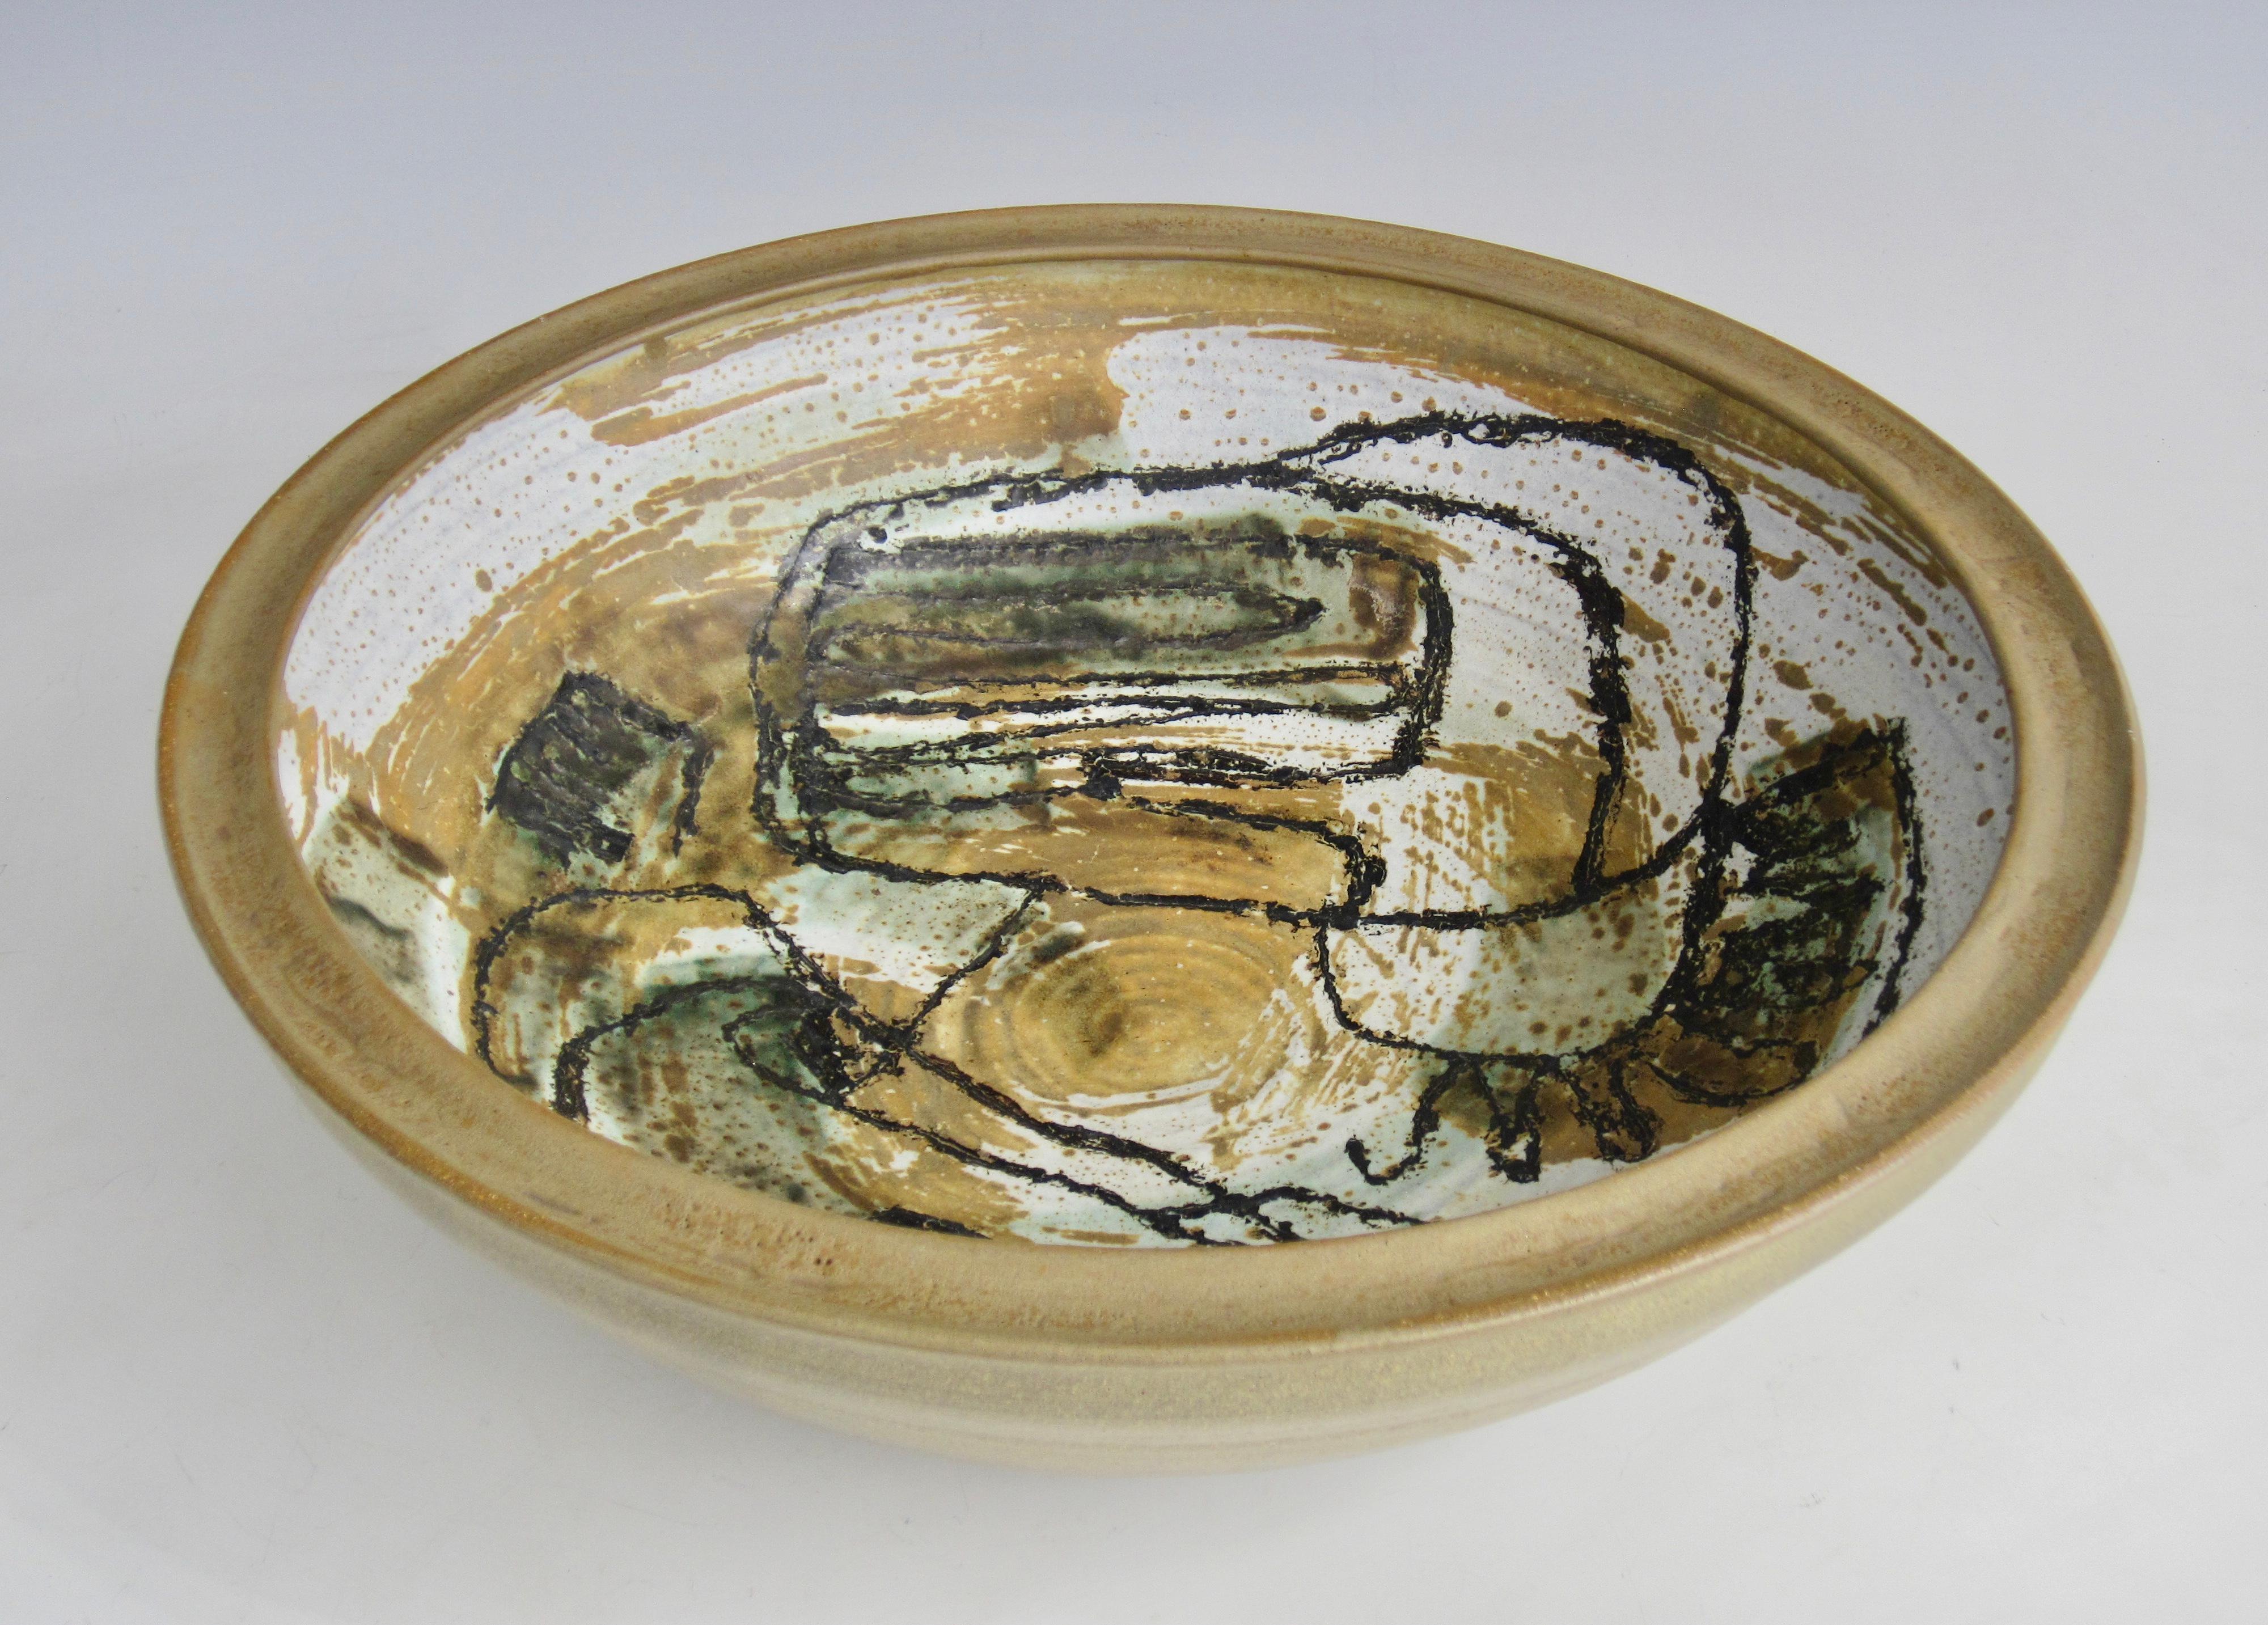 Artist signed and dated 1959, this large scale studio art earthenware bowl has approximately a one inch interior rim and khaki green exterior. Black lines and freeform shapes stand forward over washes of khaki, sage, and white on the interior. 
I